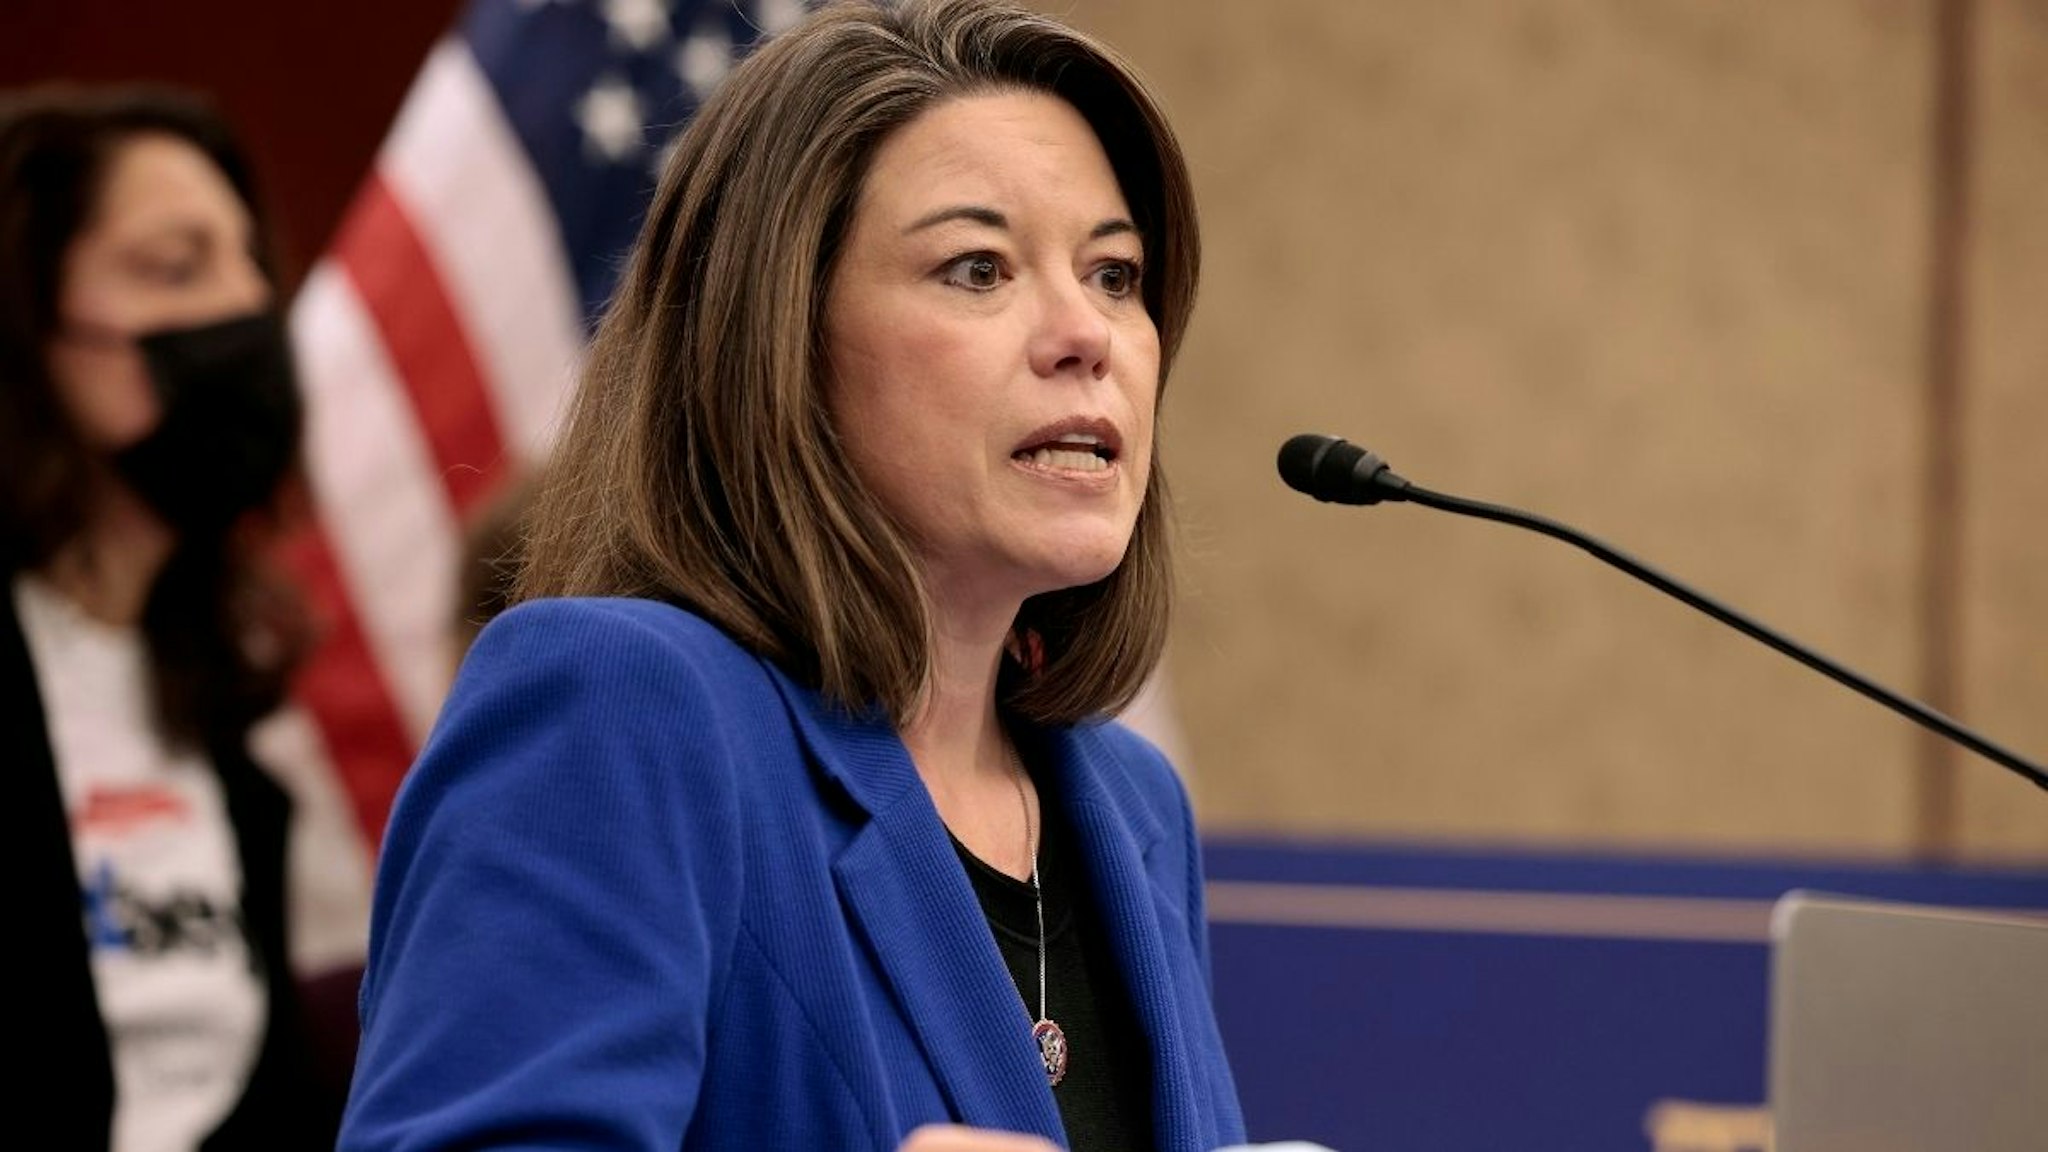 Rep. Angie Craig (D-MN) speaks at a press conference at the U.S. Capitol Building on December 14, 2021 in Washington, DC.